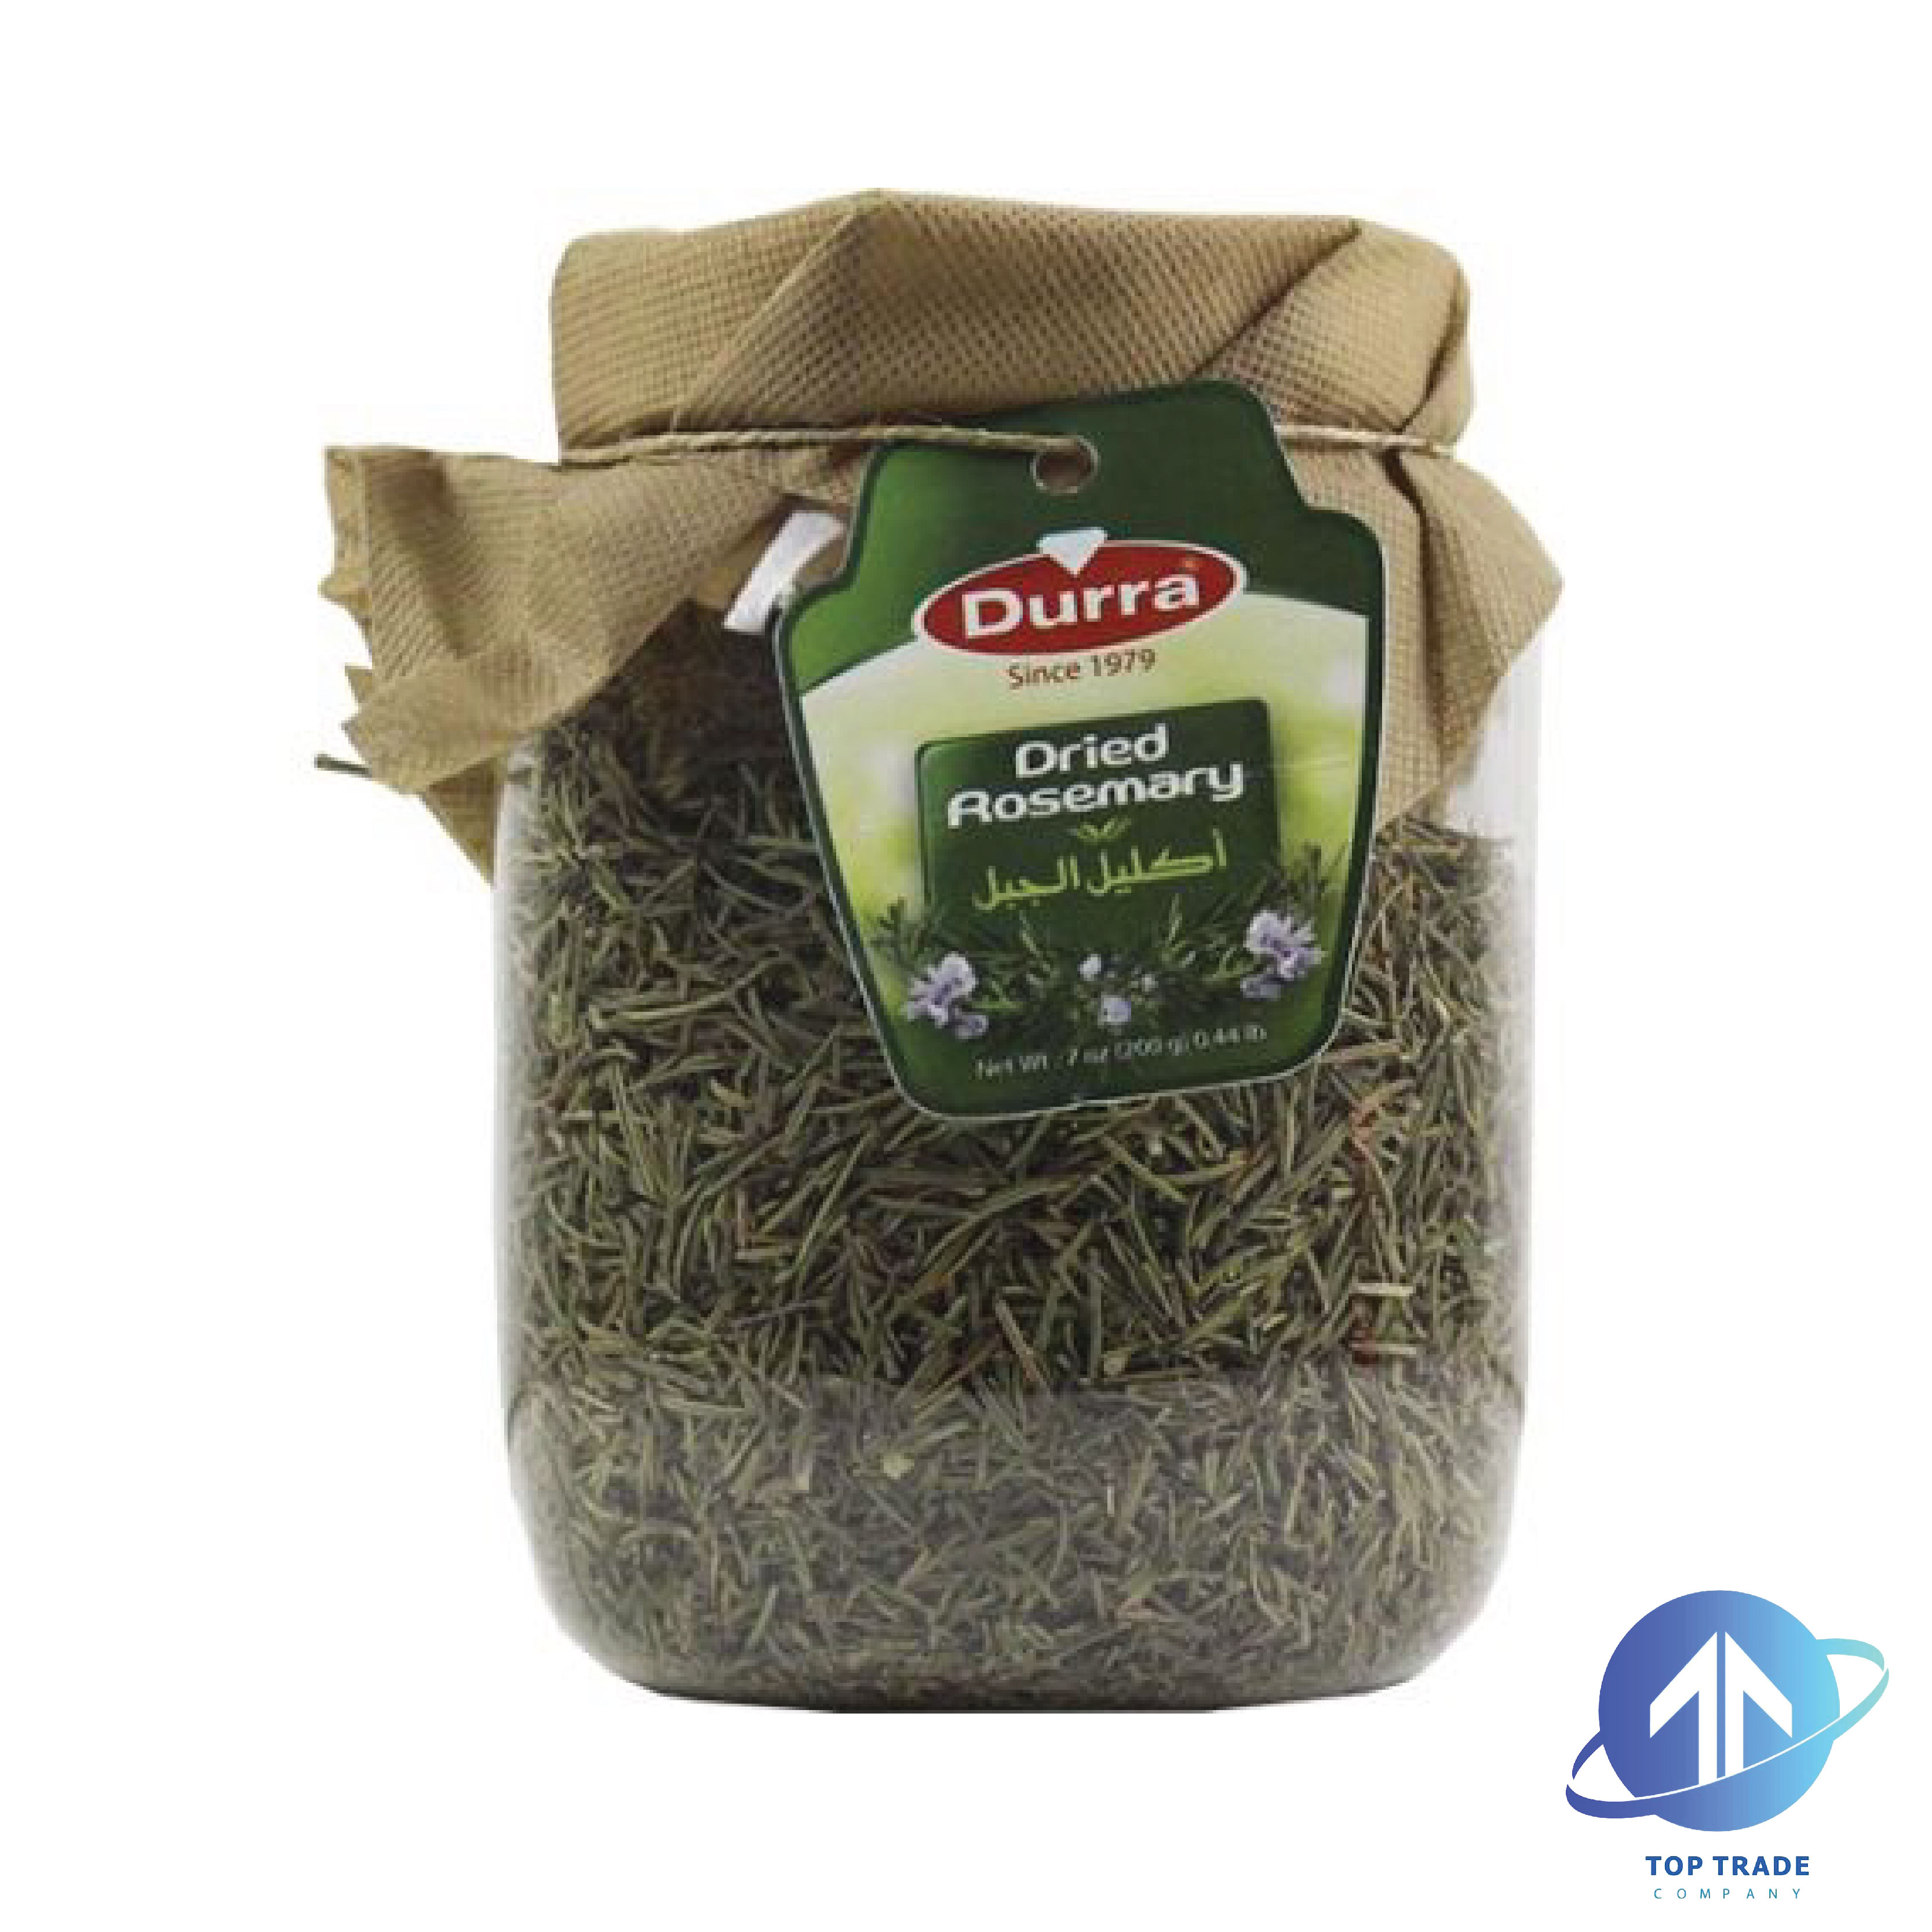 Durra Dried Rosemary 200gr